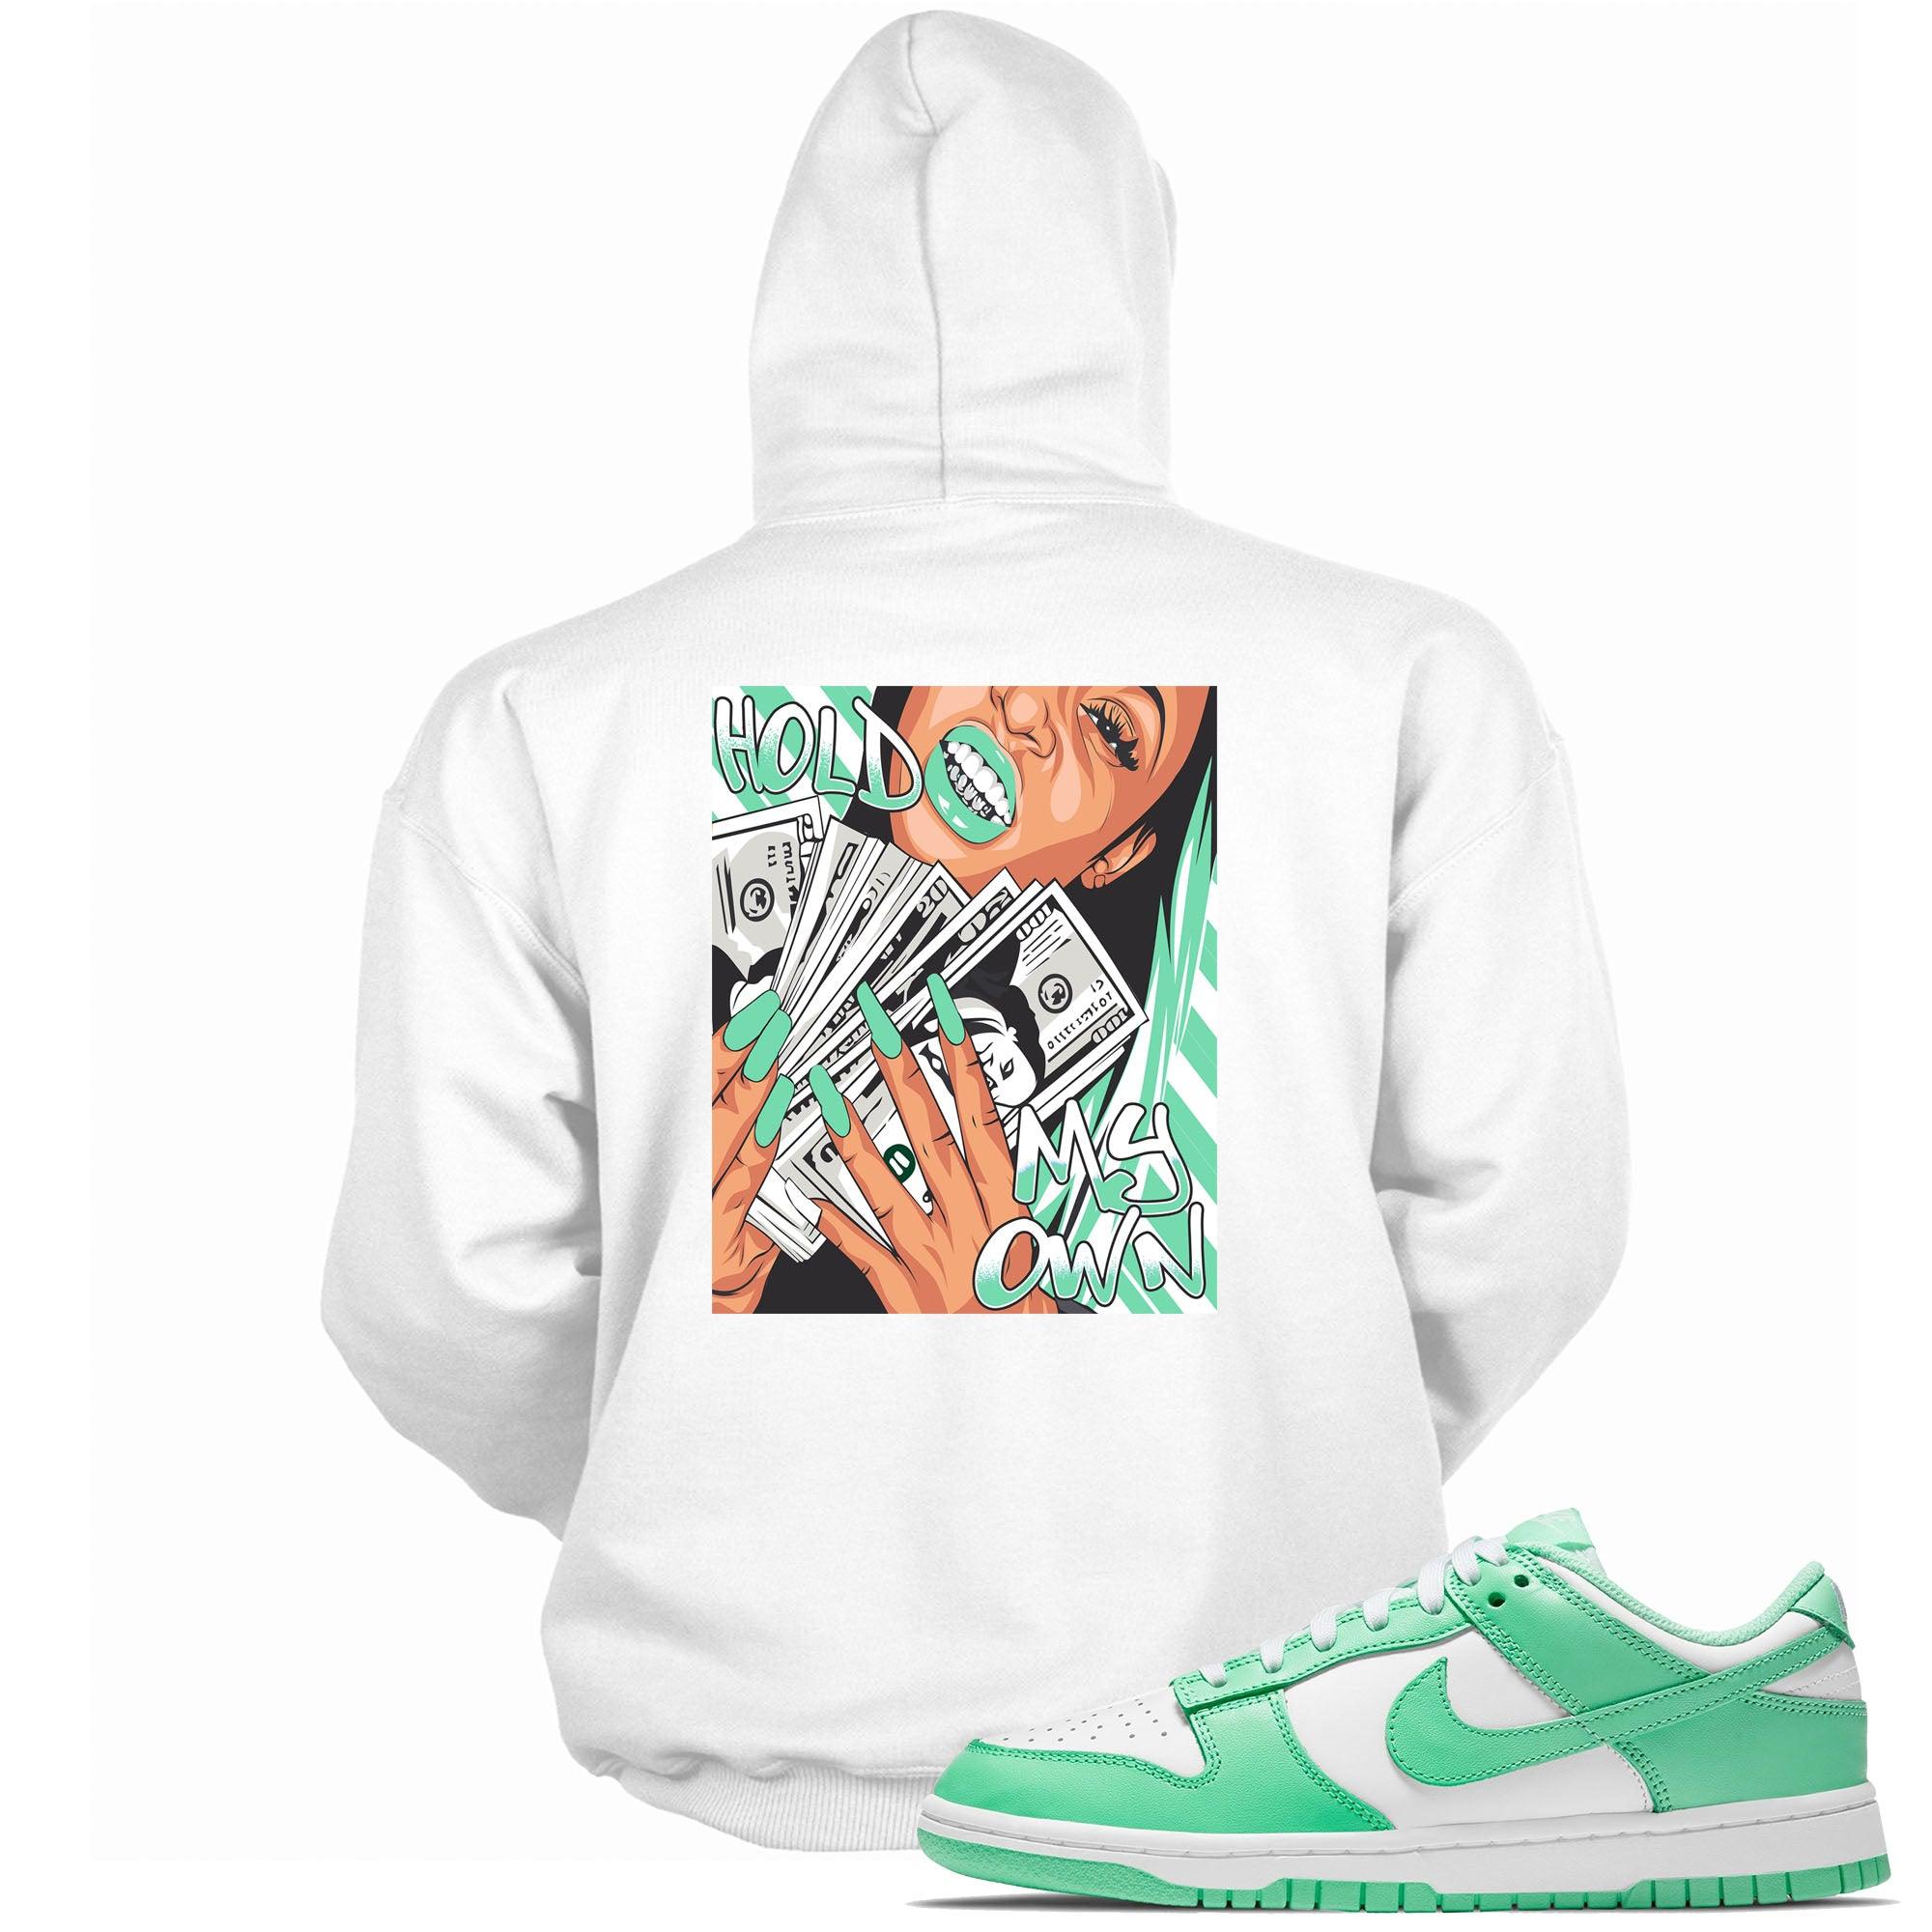 Hold My Own Hoodie Nike Dunk Low Green Glow photo